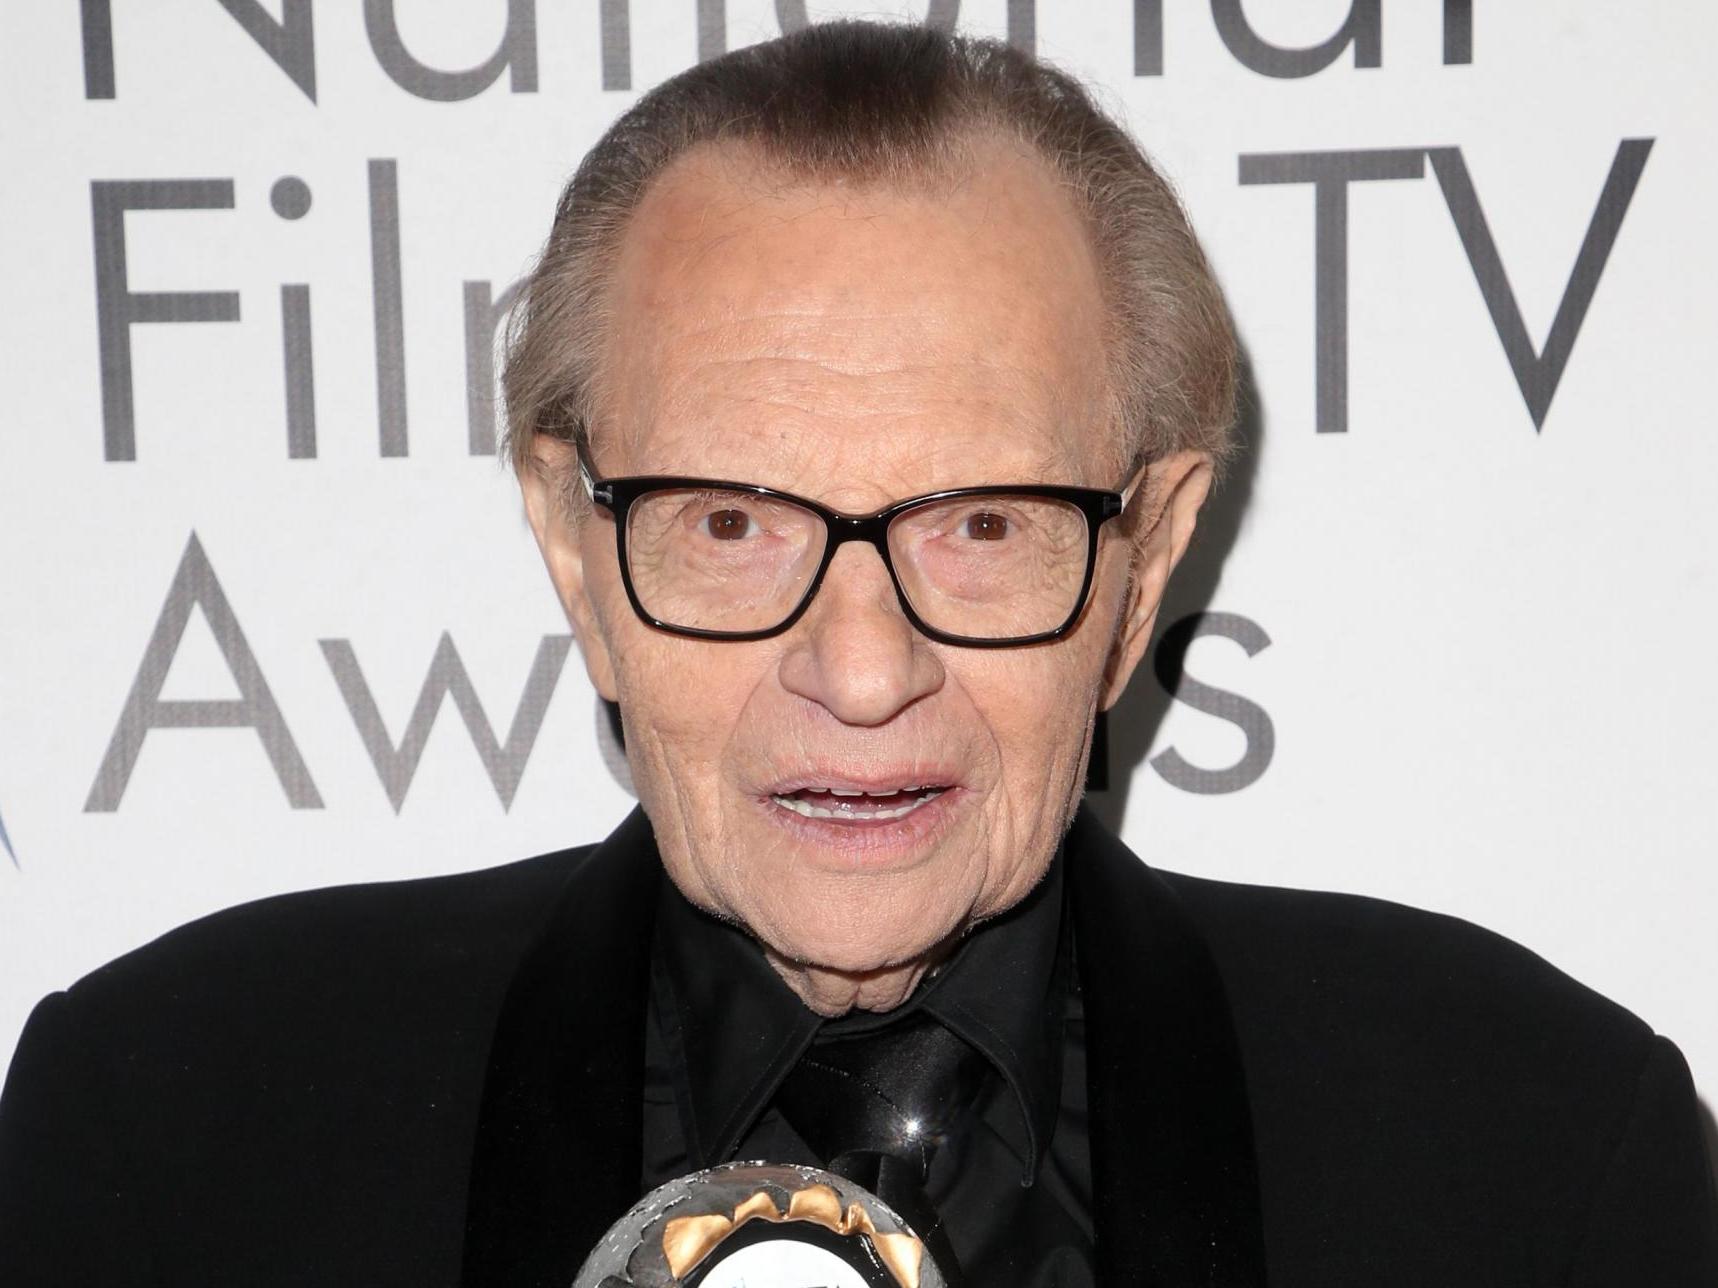 Larry King at The National Film and Television Awards in 2018